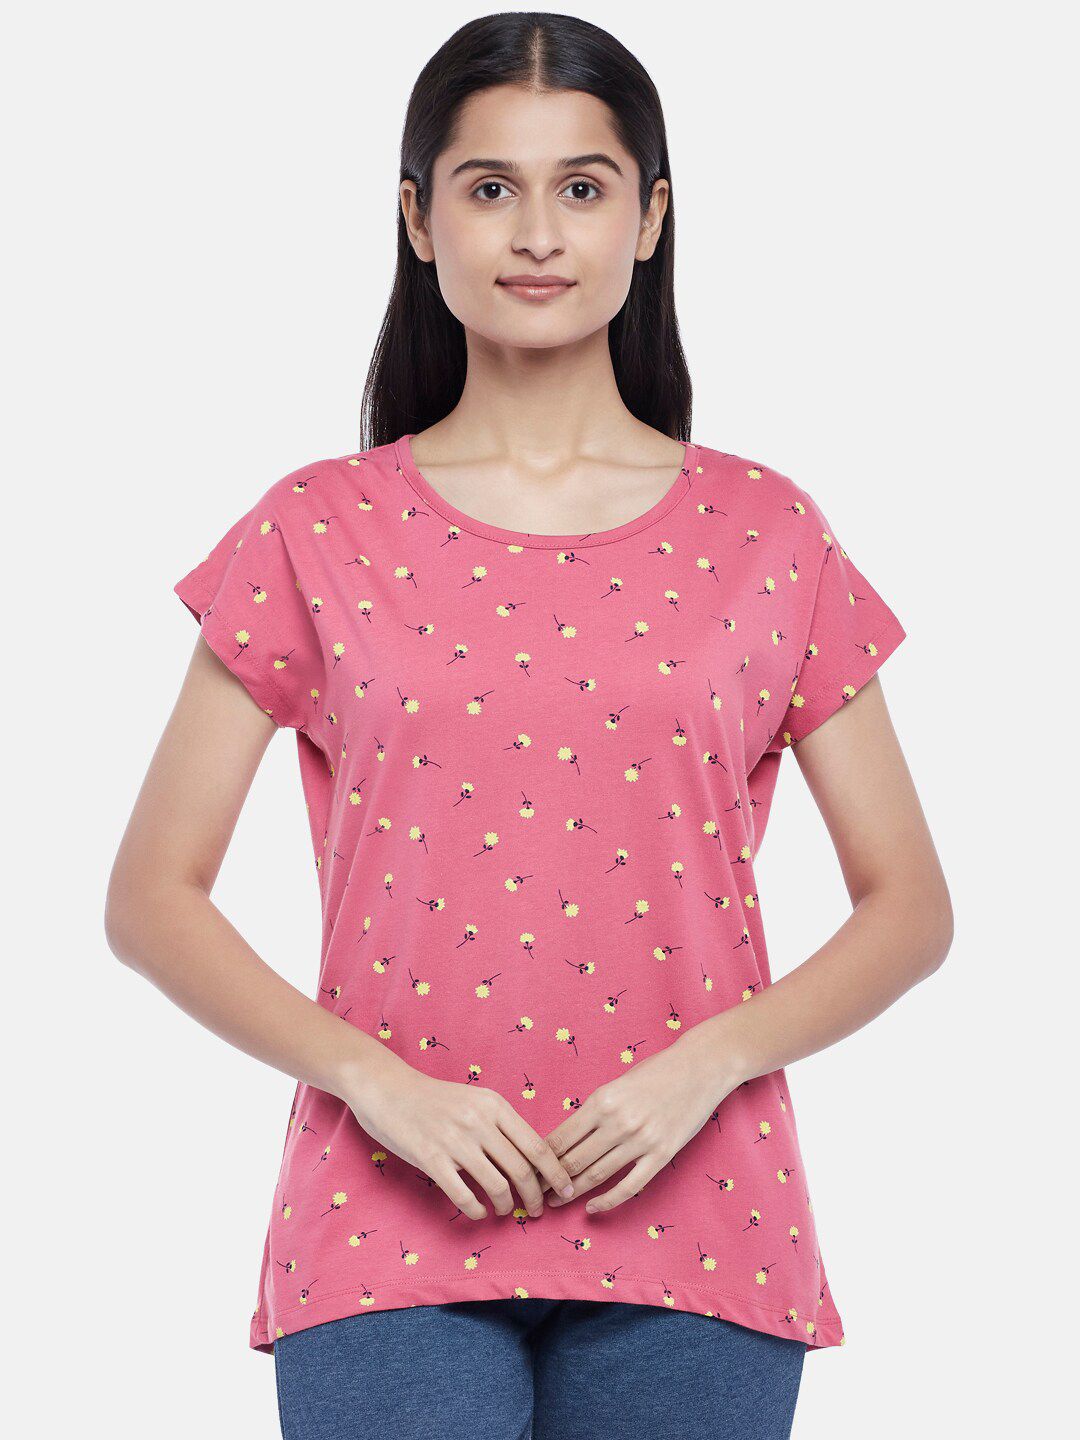 Dreamz by Pantaloons Pink Floral Printed Extended Sleeves Pure Cotton Lounge tshirt Price in India